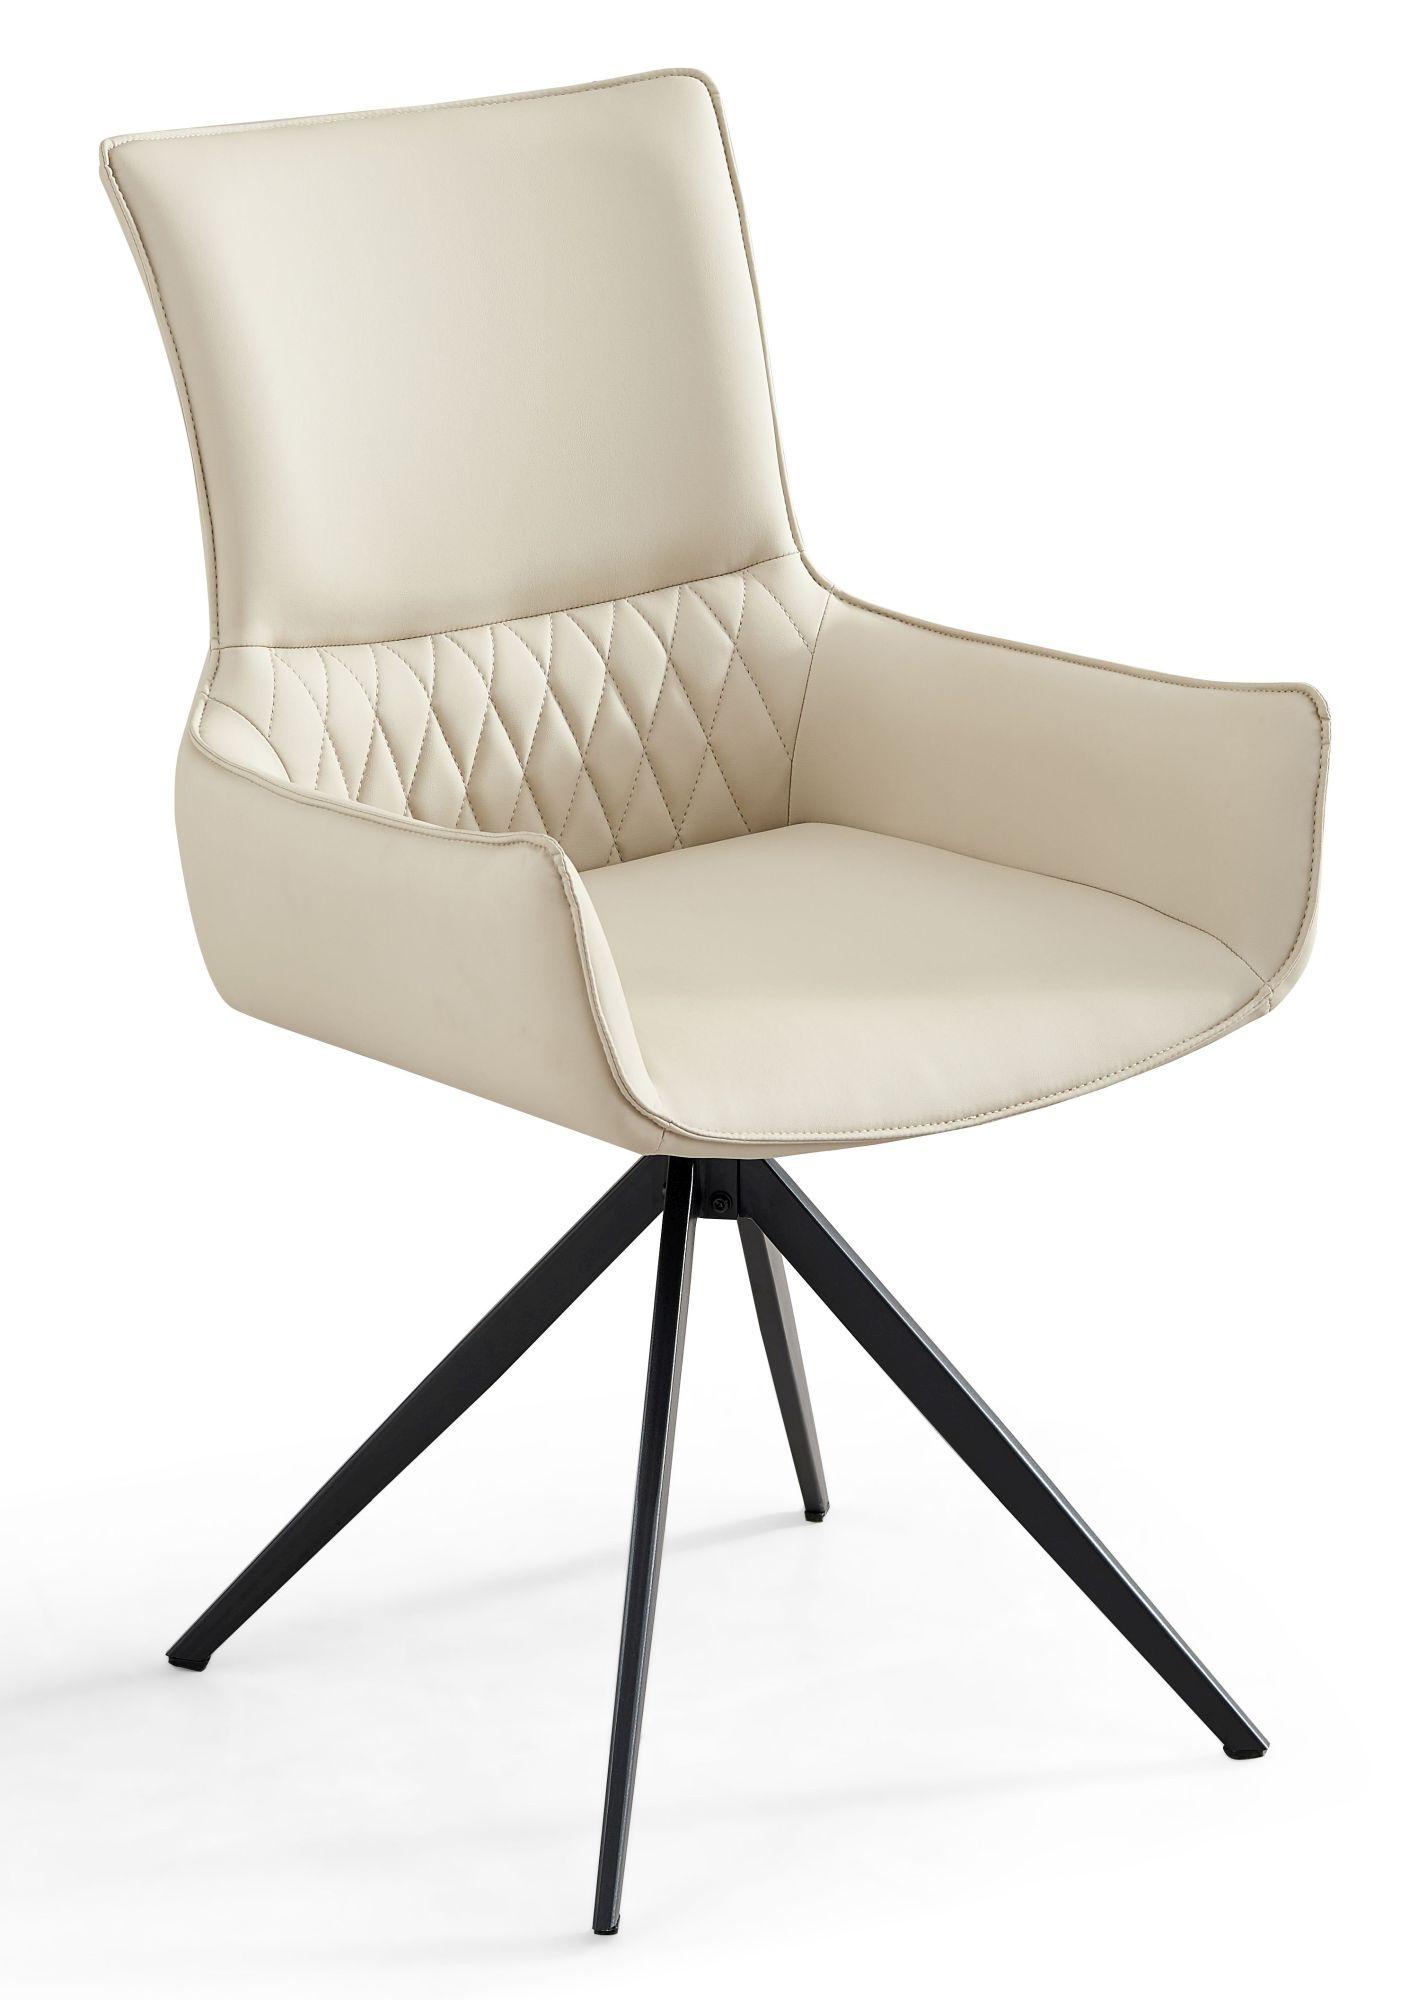 Chicago Cream Faux Leather Swivel Dining Chair with Black Legs